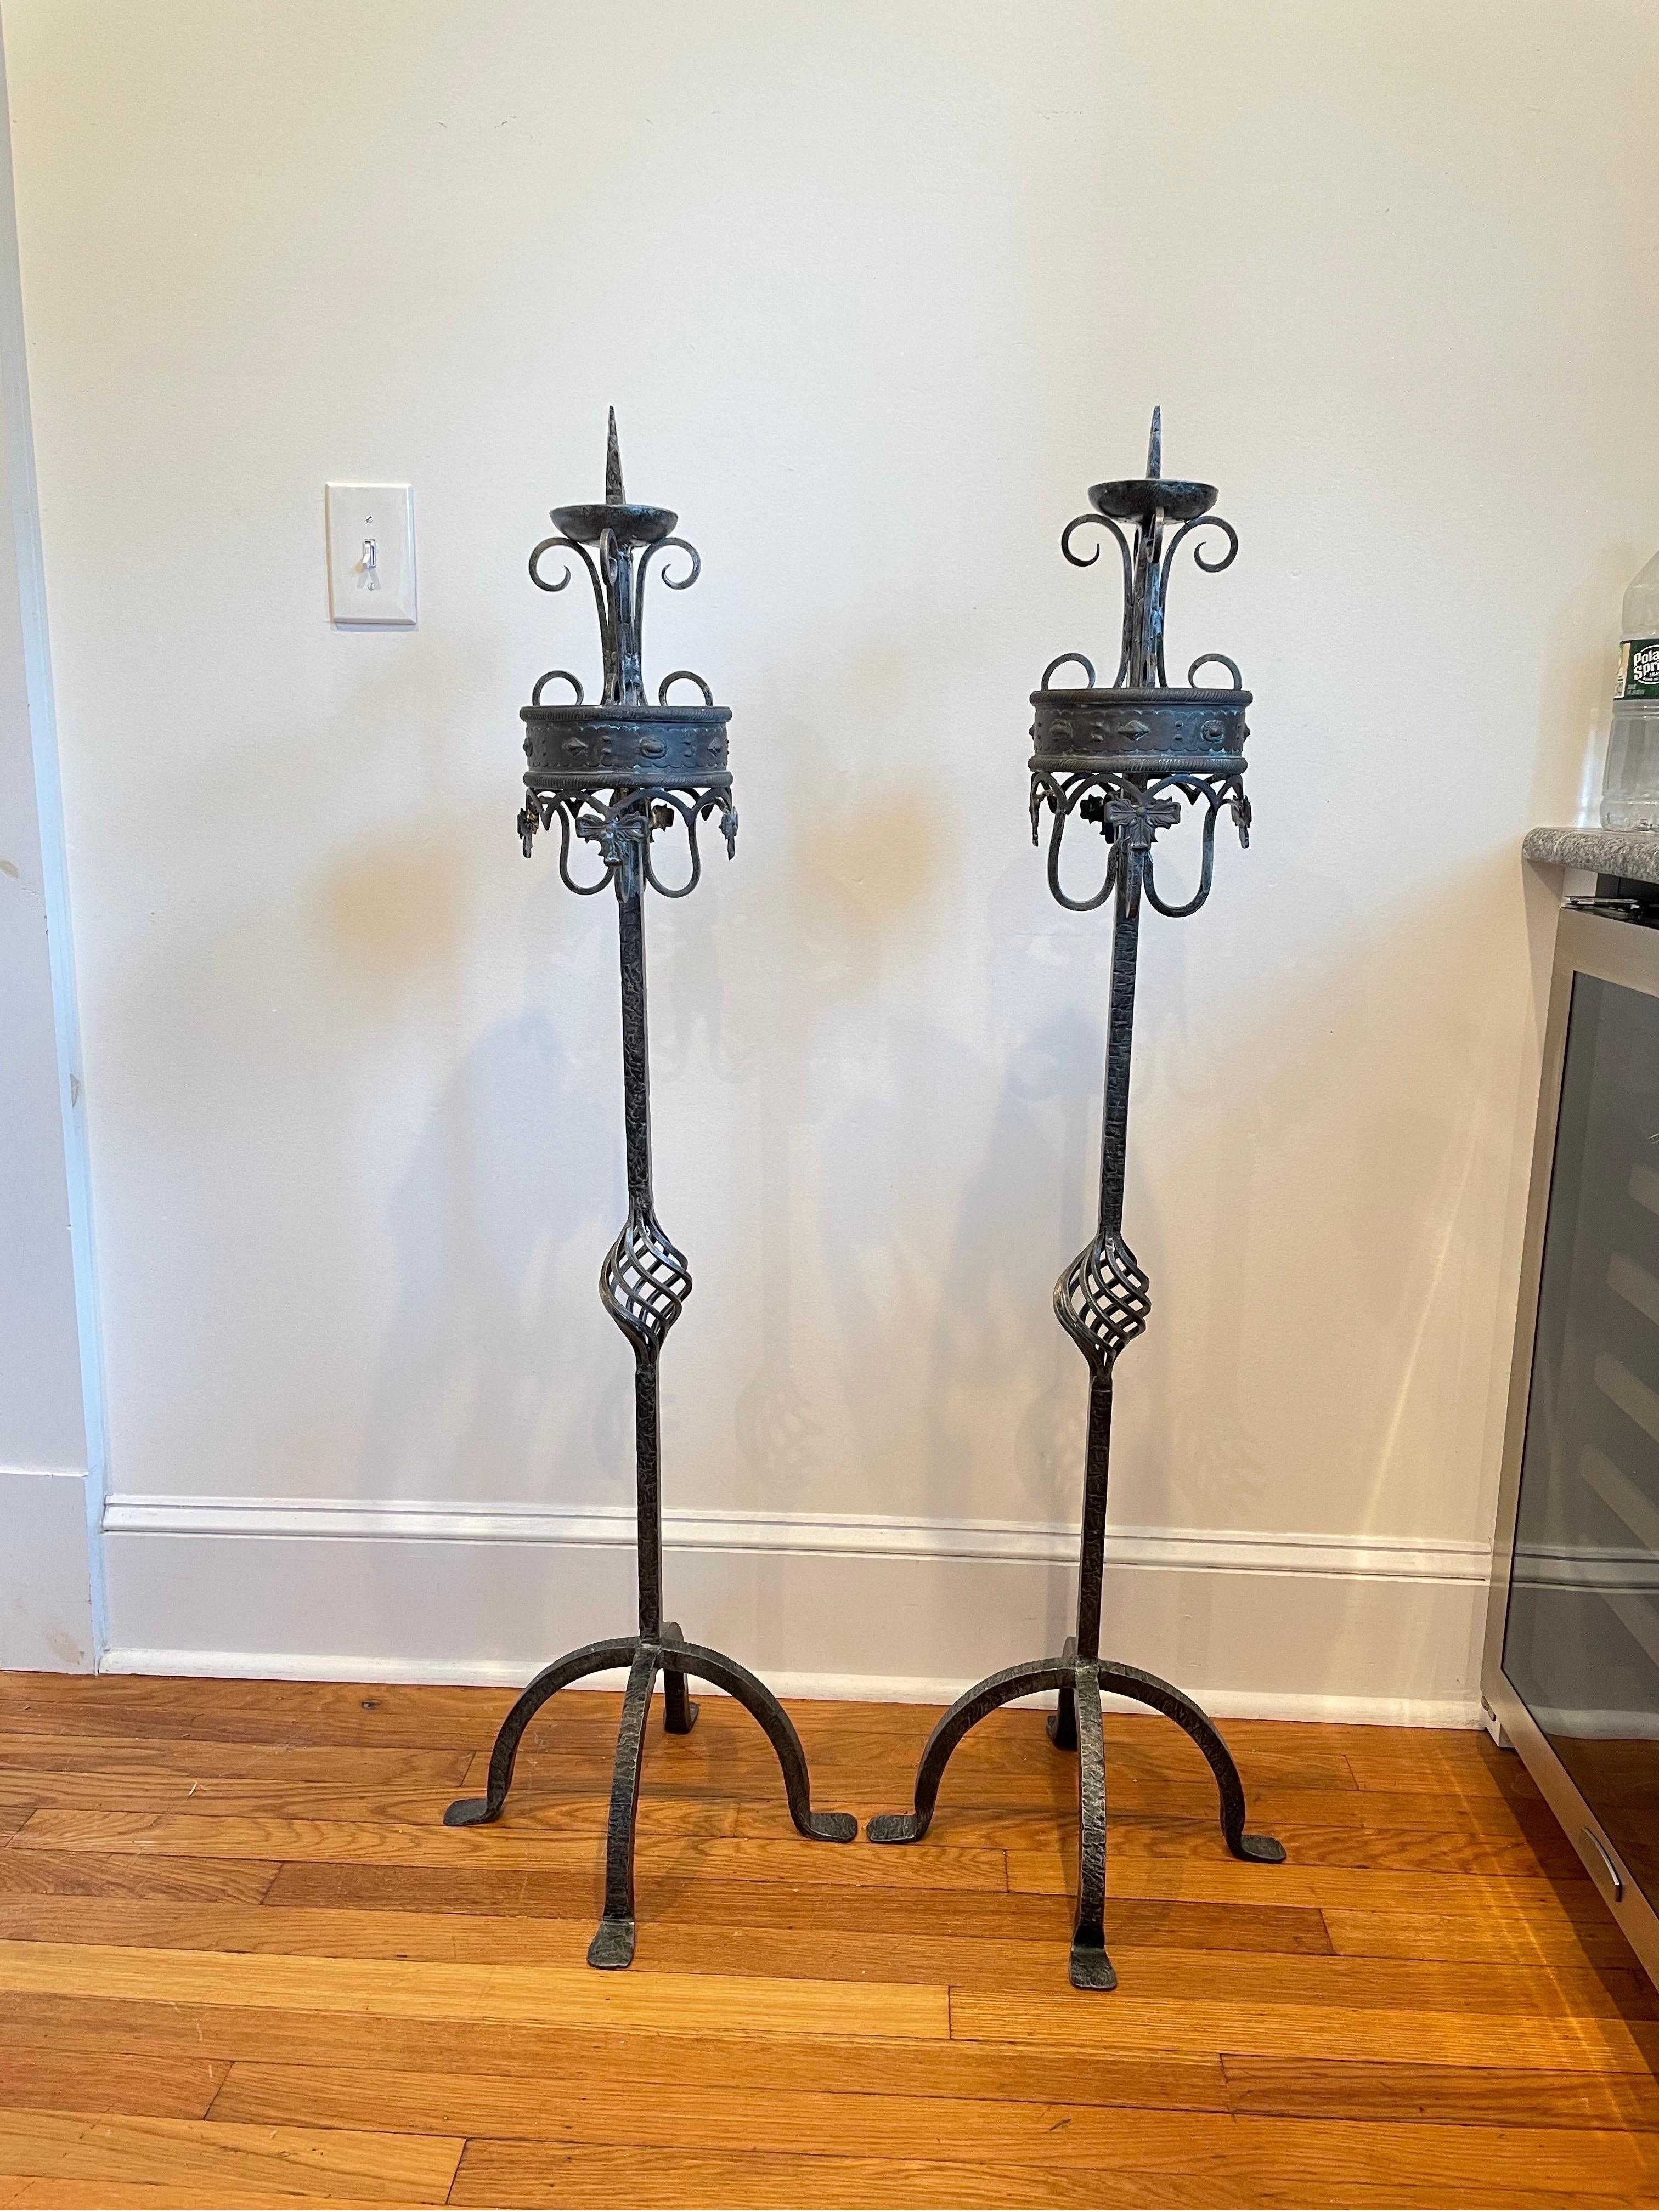 Striking iron floor candle holder with decorative bronze detail.

Curbside delivery available up to 70 miles from zip code 07711. $250